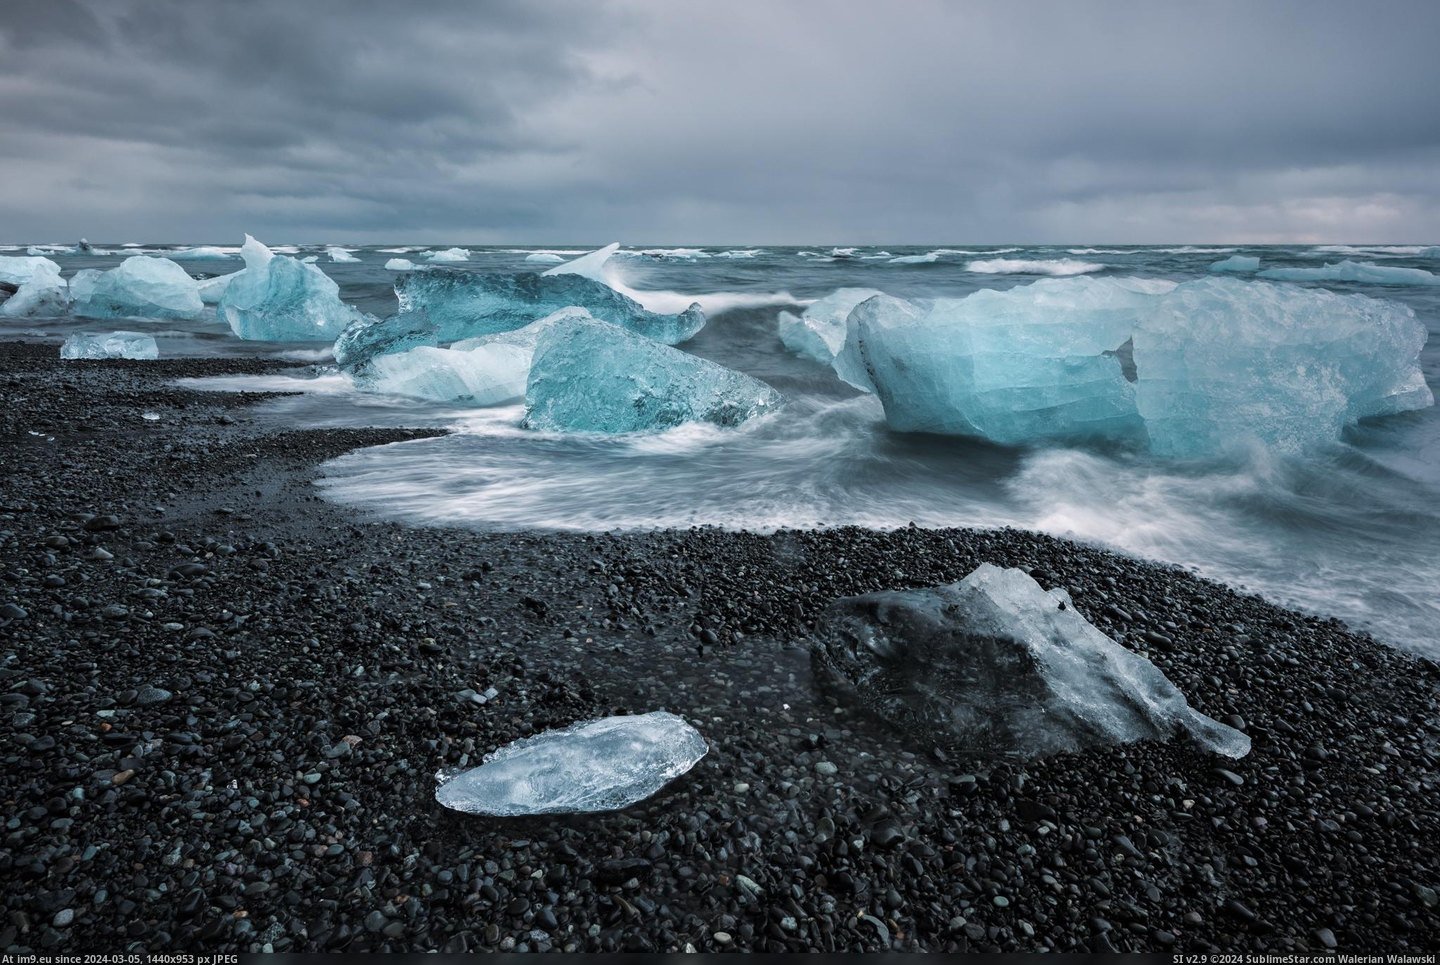 #Black #Beach #Road #Volcanic #Washing #Glacial #Icebergs #Sand #Ring #Lagoon [Earthporn]  Icebergs washing up on a black volcanic sand beach across the ring road from the glacial lagoon - Jökulsárlón, Icel Pic. (Image of album My r/EARTHPORN favs))